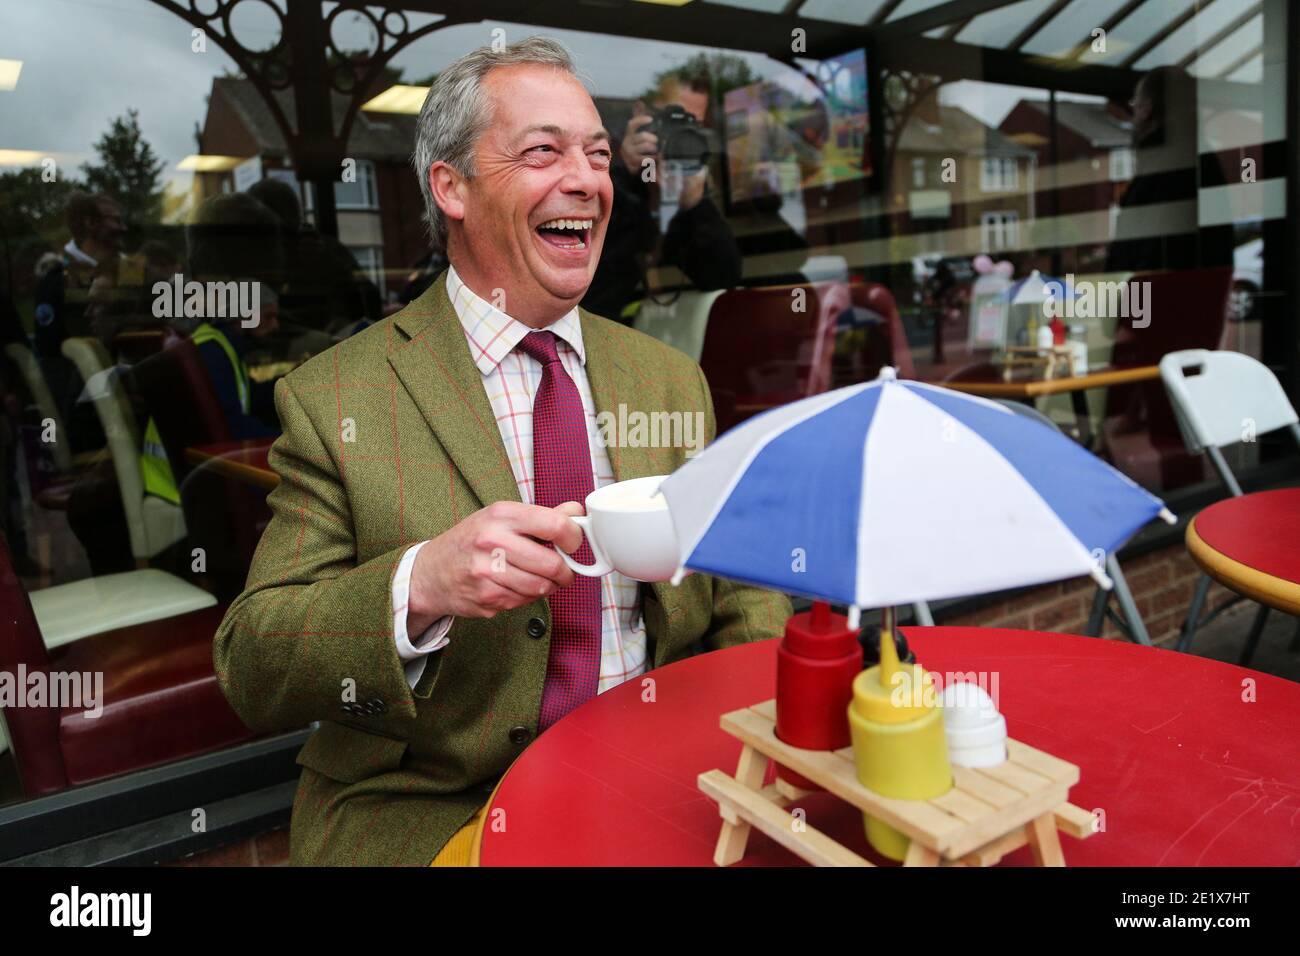 25/05/16. Stocksbridge, UK. Nigel Farage sips a cup of tea in Stocksbridge, South Yorkshire, during campaigning in the run up to the EU referendum. Stock Photo